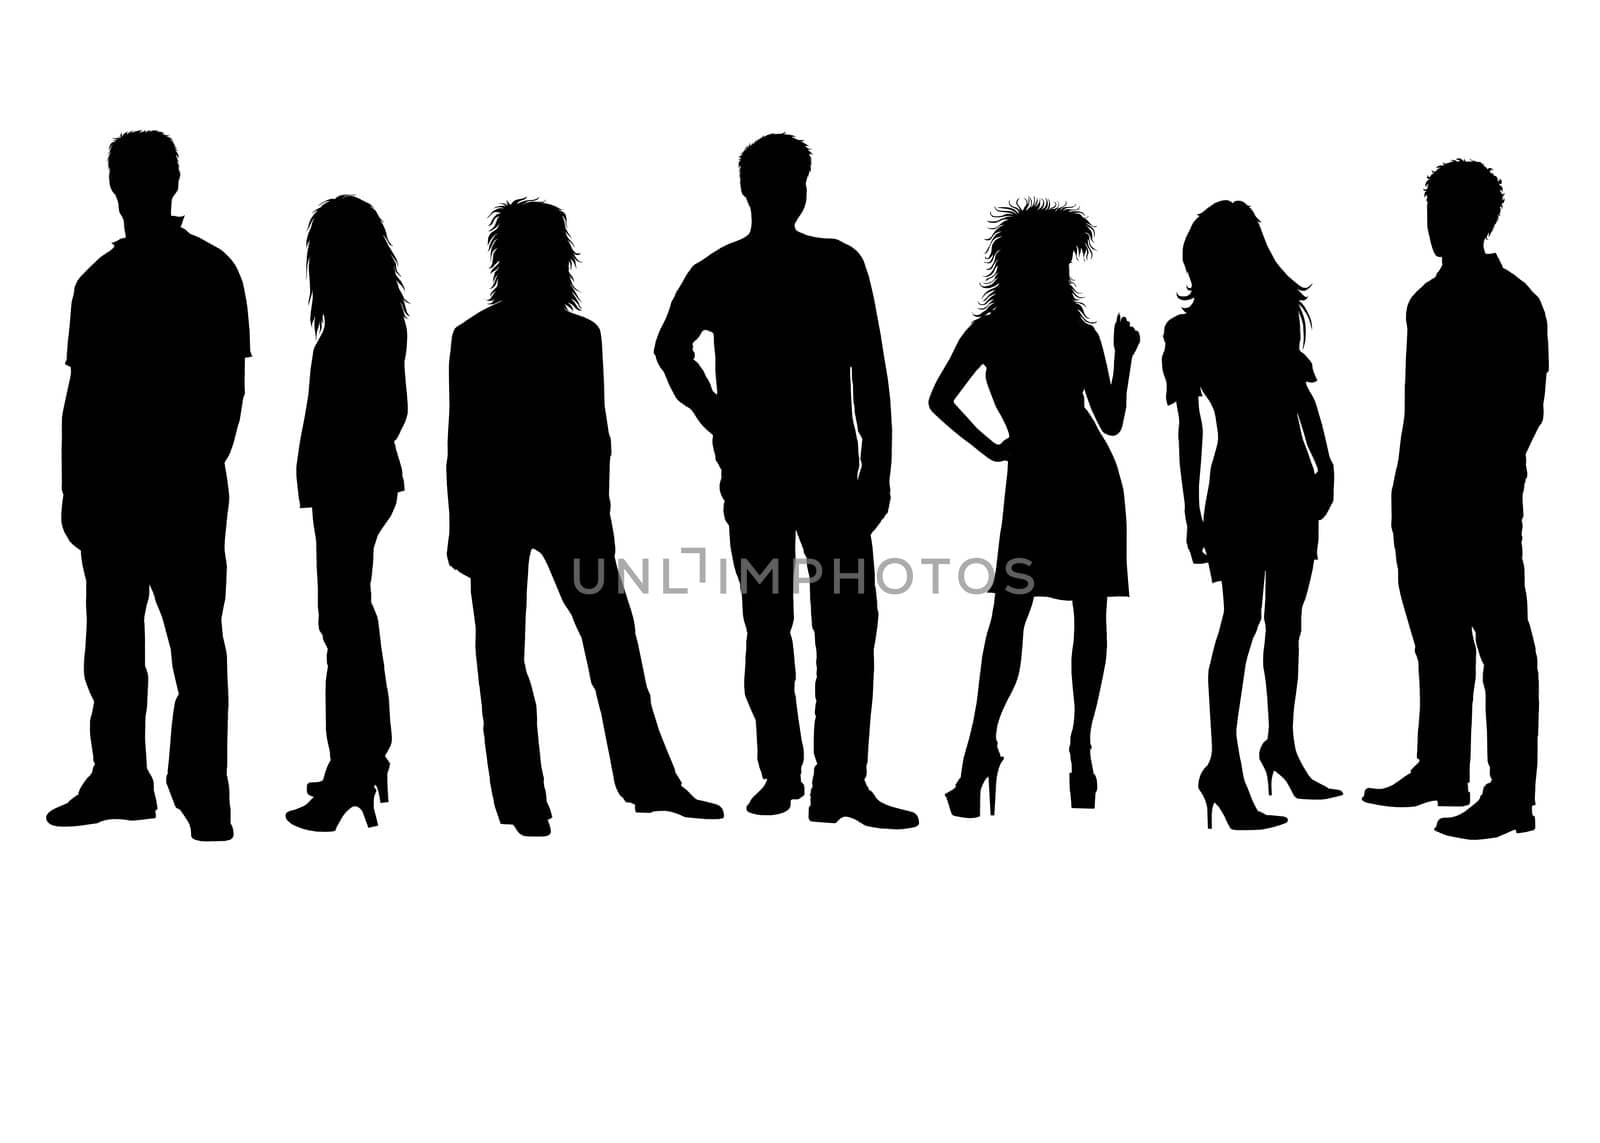 Friends - girls and boys - silhouettes by peromarketing